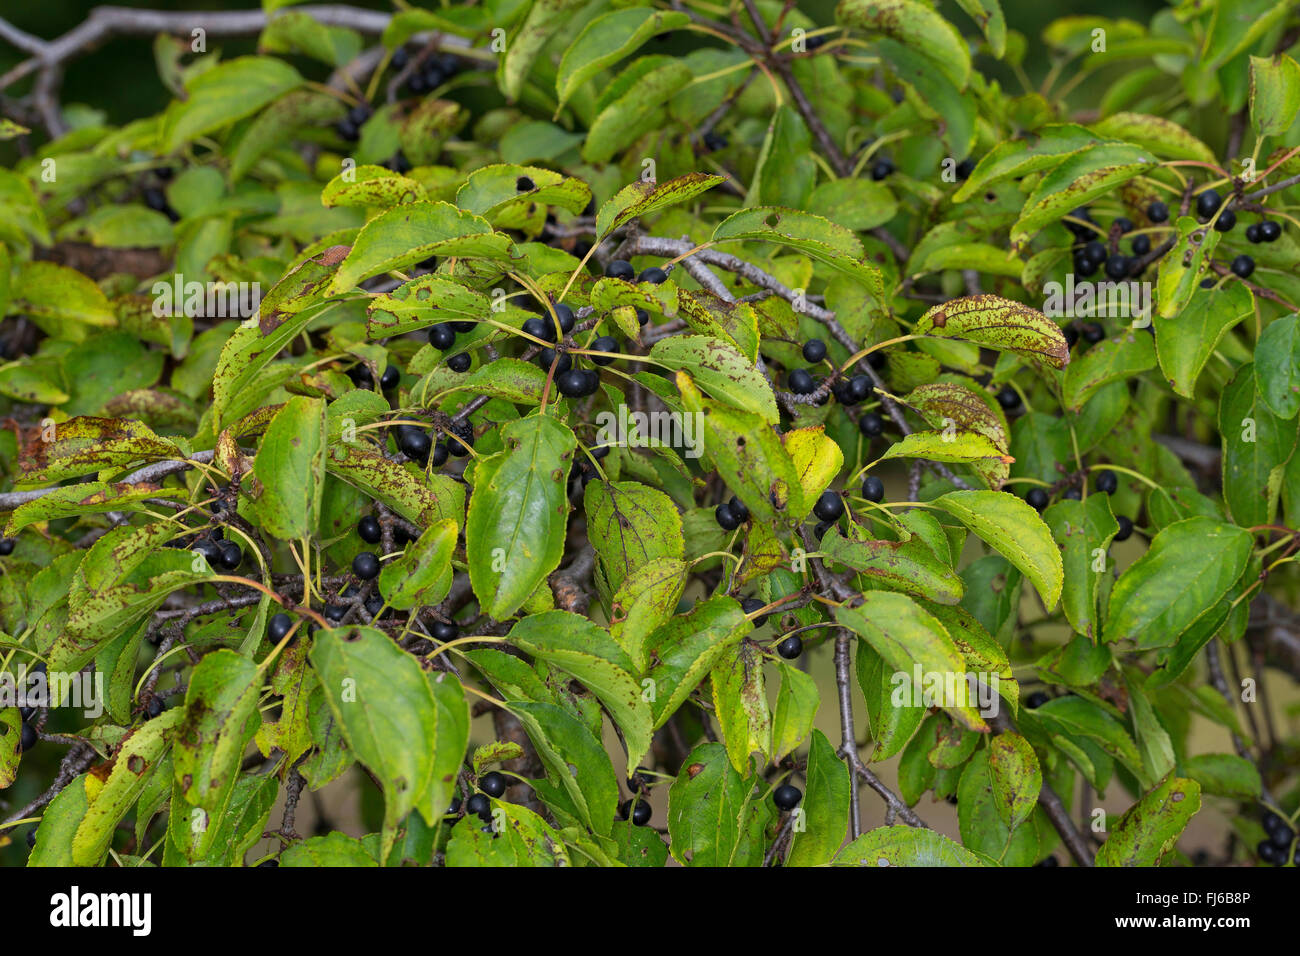 common buckthorn (Rhamnus catharticus), fruit on a branch, Germany Stock Photo